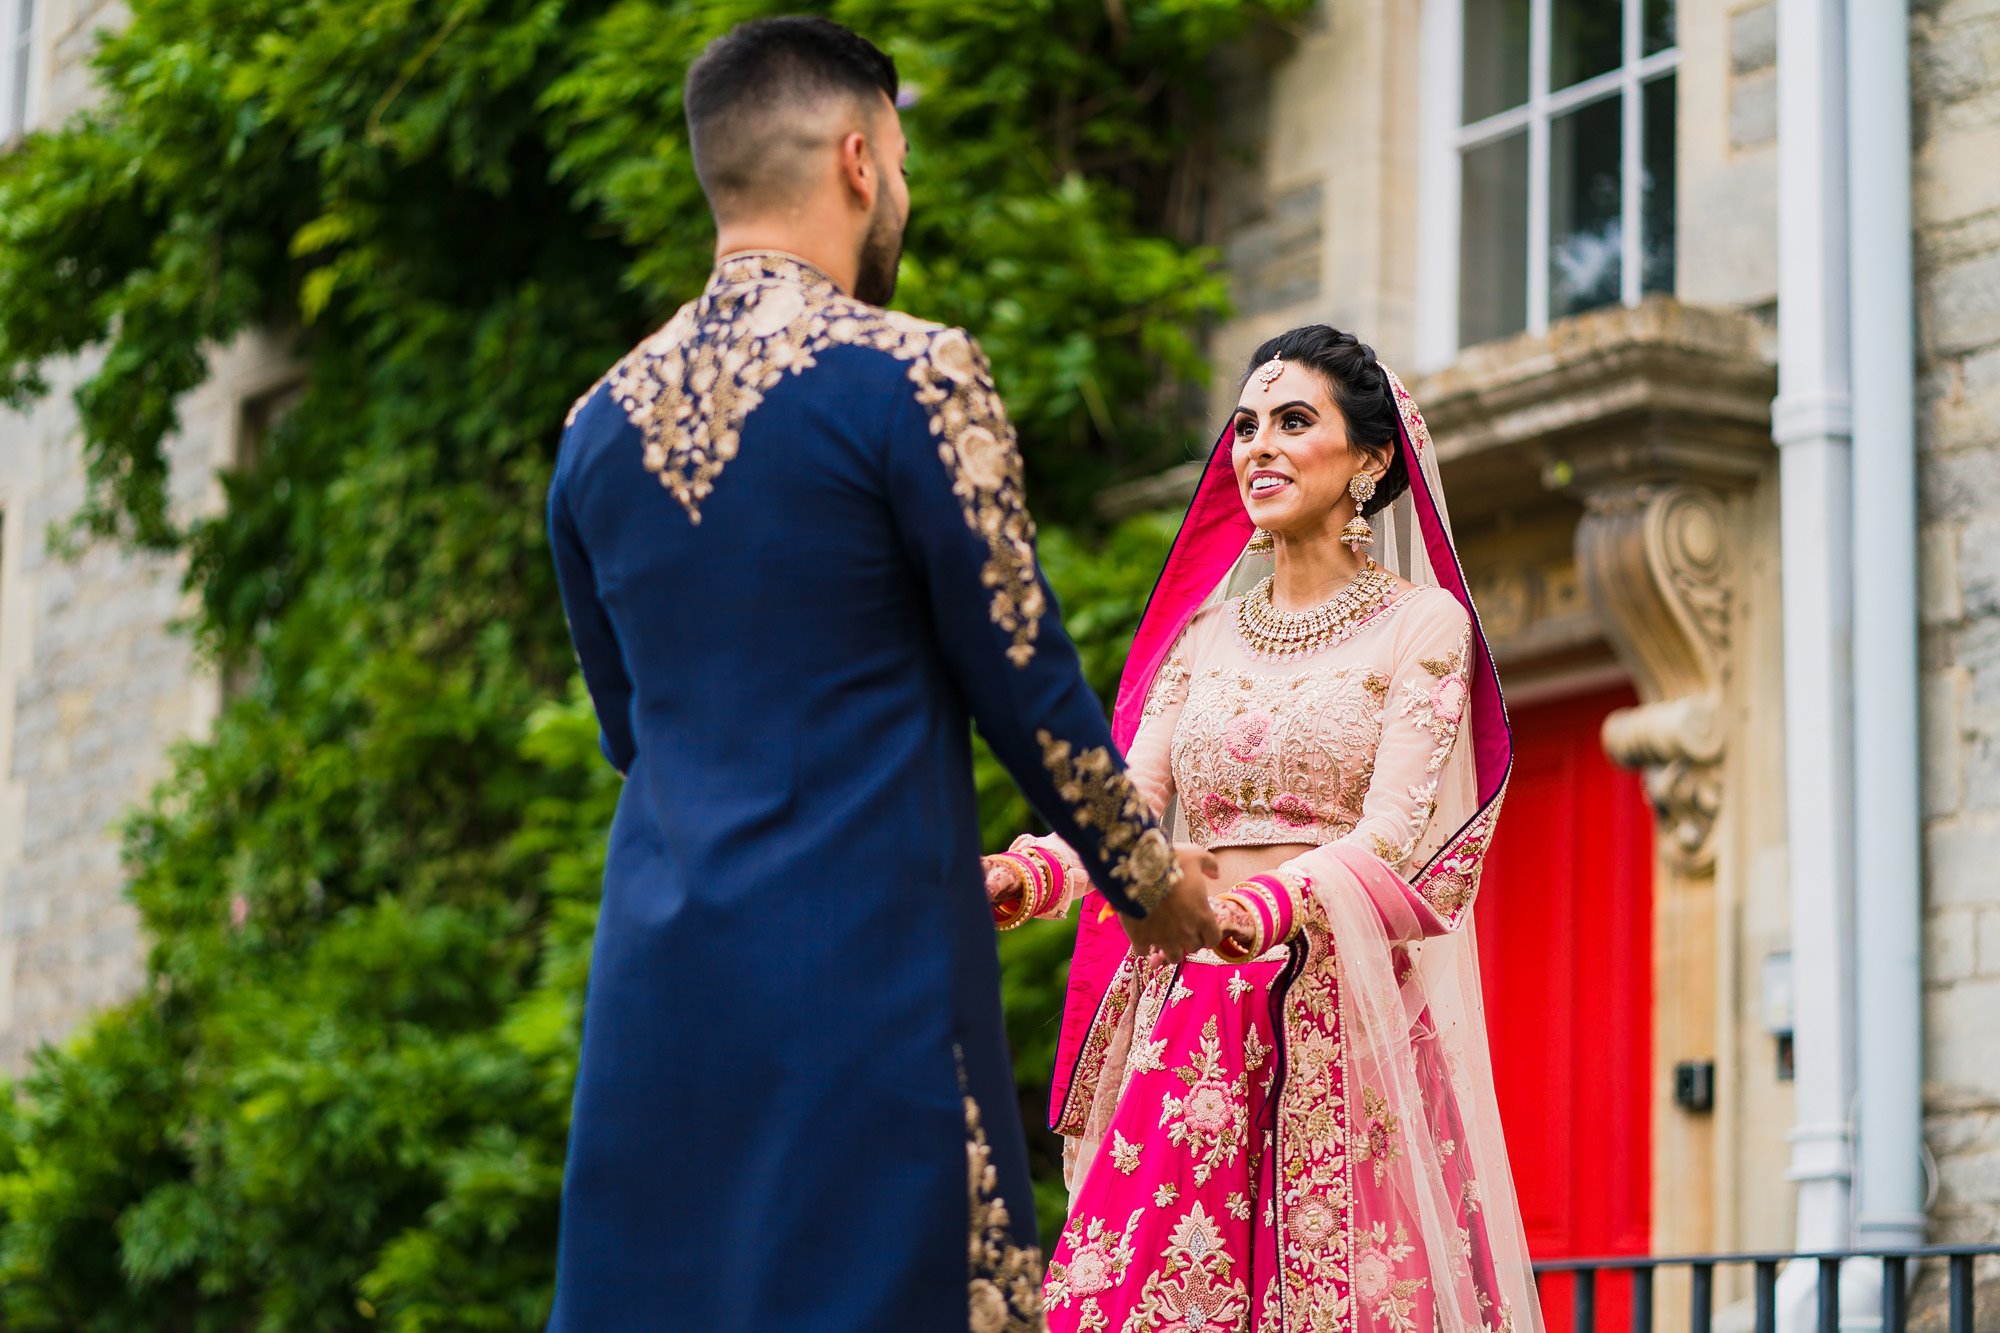 Indian bride and groom dresses in beautiful traditional indian wedding attire take a moment for a first look and gaze lovingly at each other holding hands in front of the red side door at Elmore Court